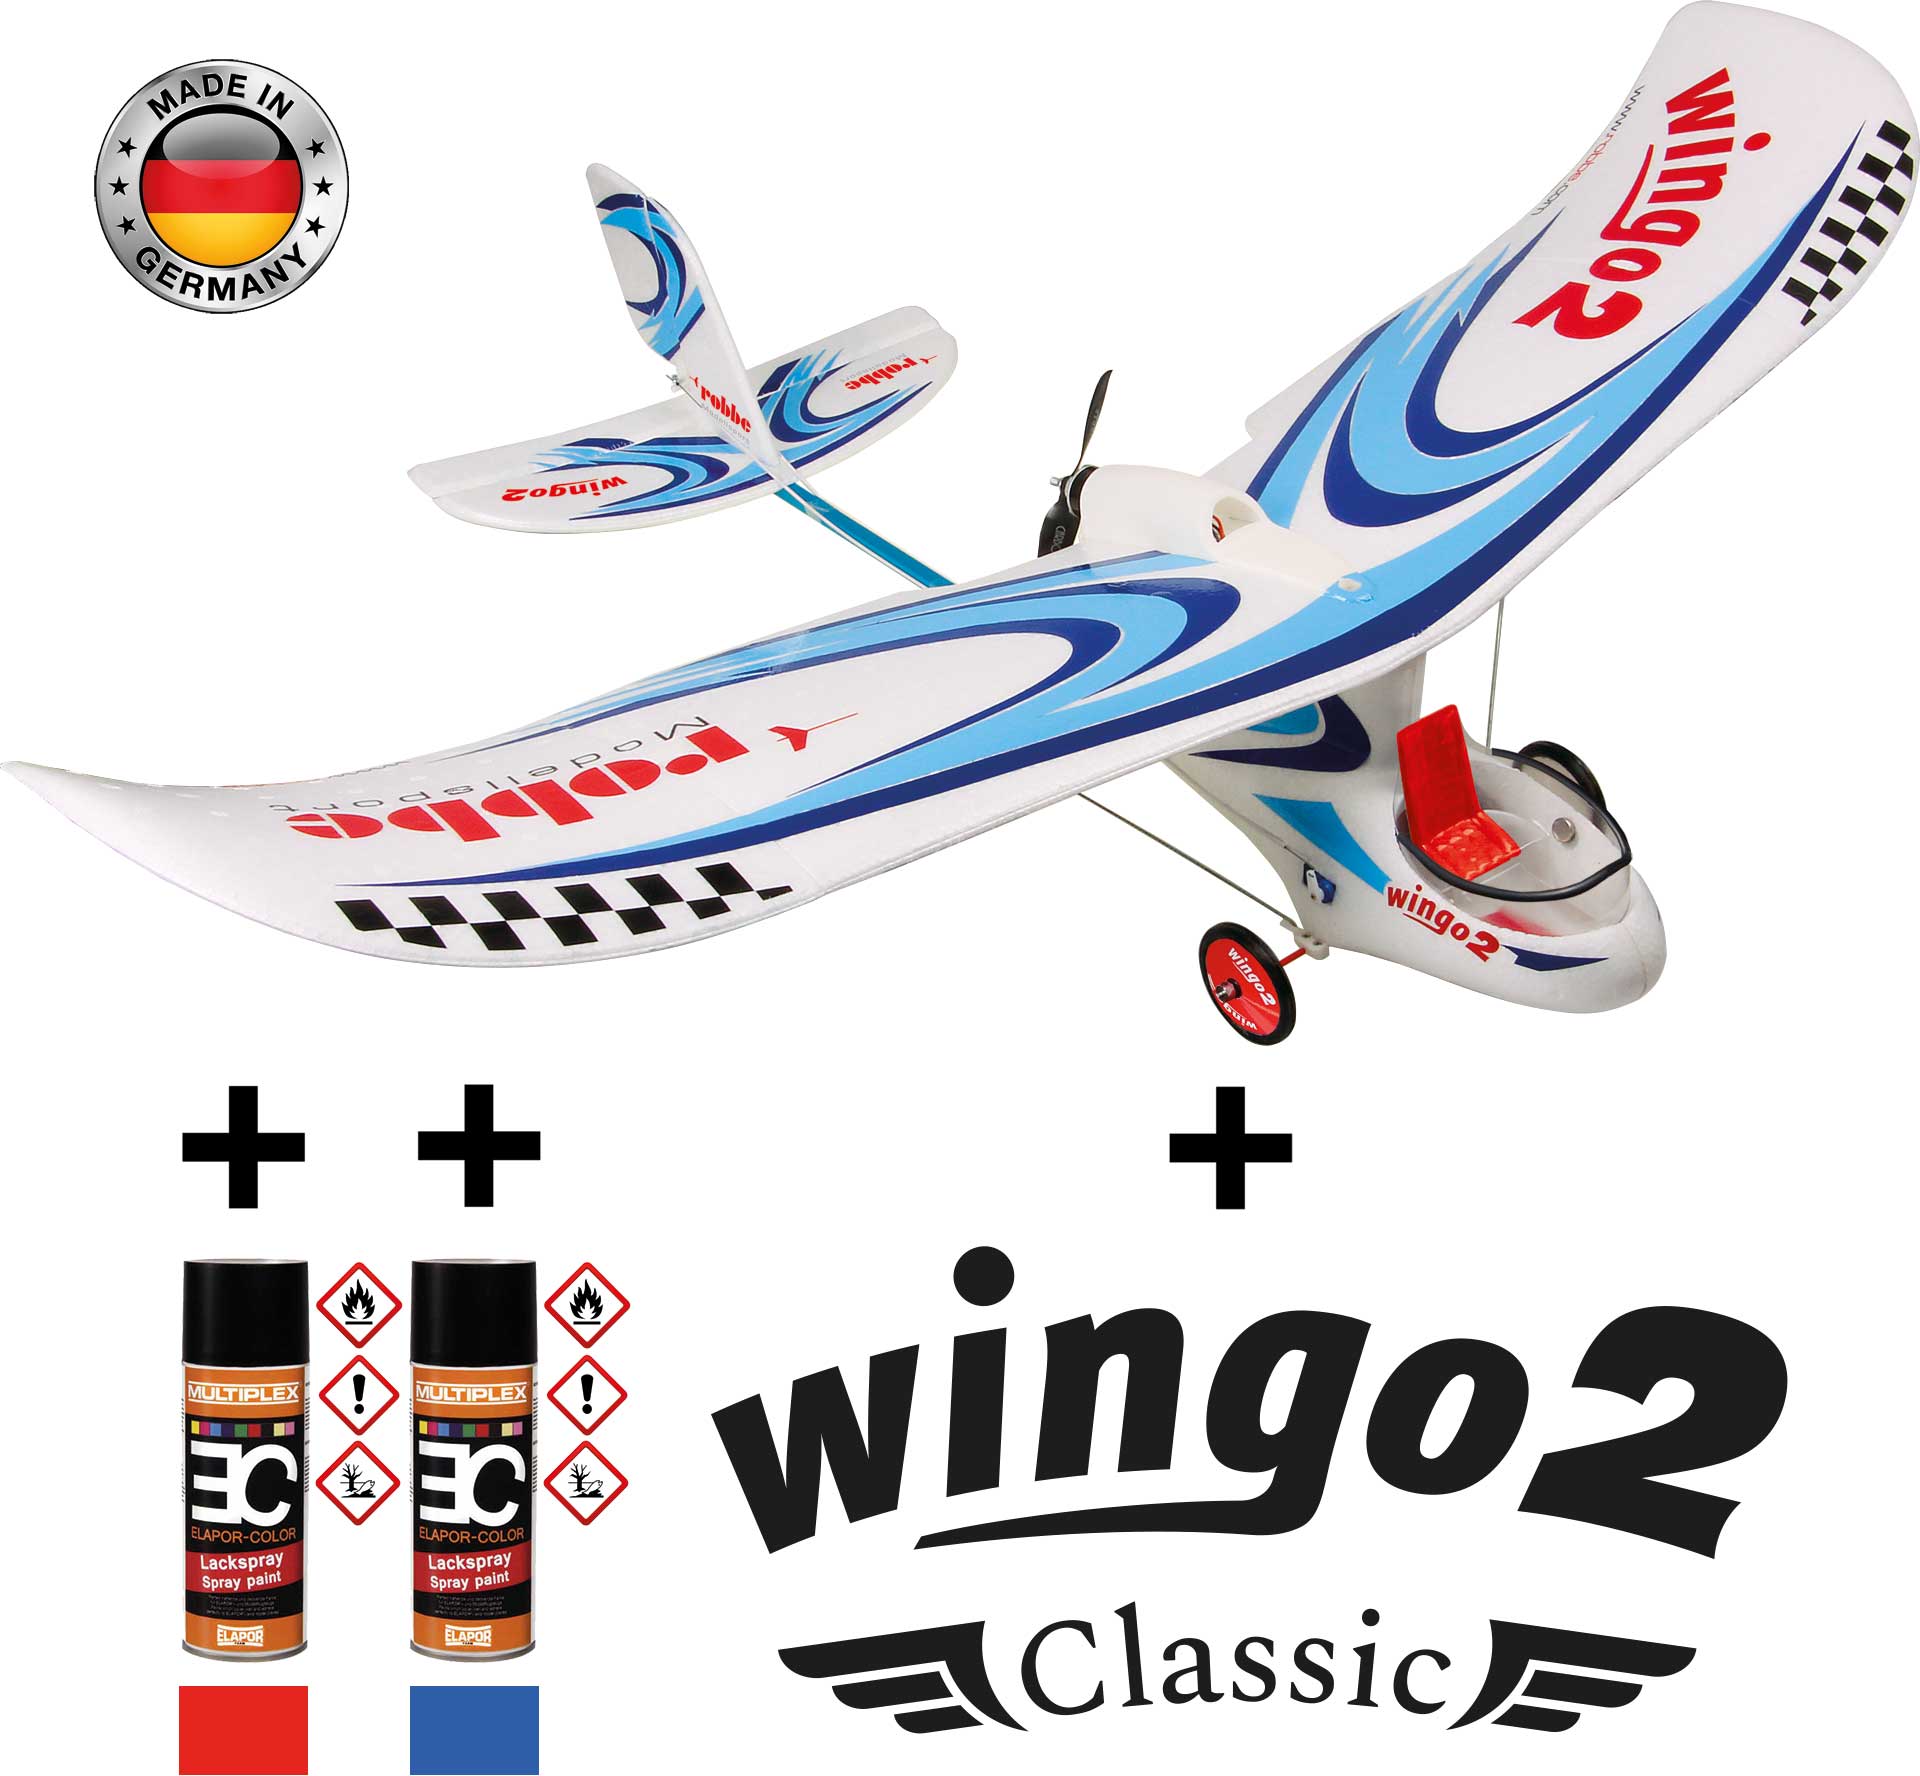 Robbe Modellsport Wingo 2 Kit "Classic" special version with "Classic" decor set and color spray red/blue